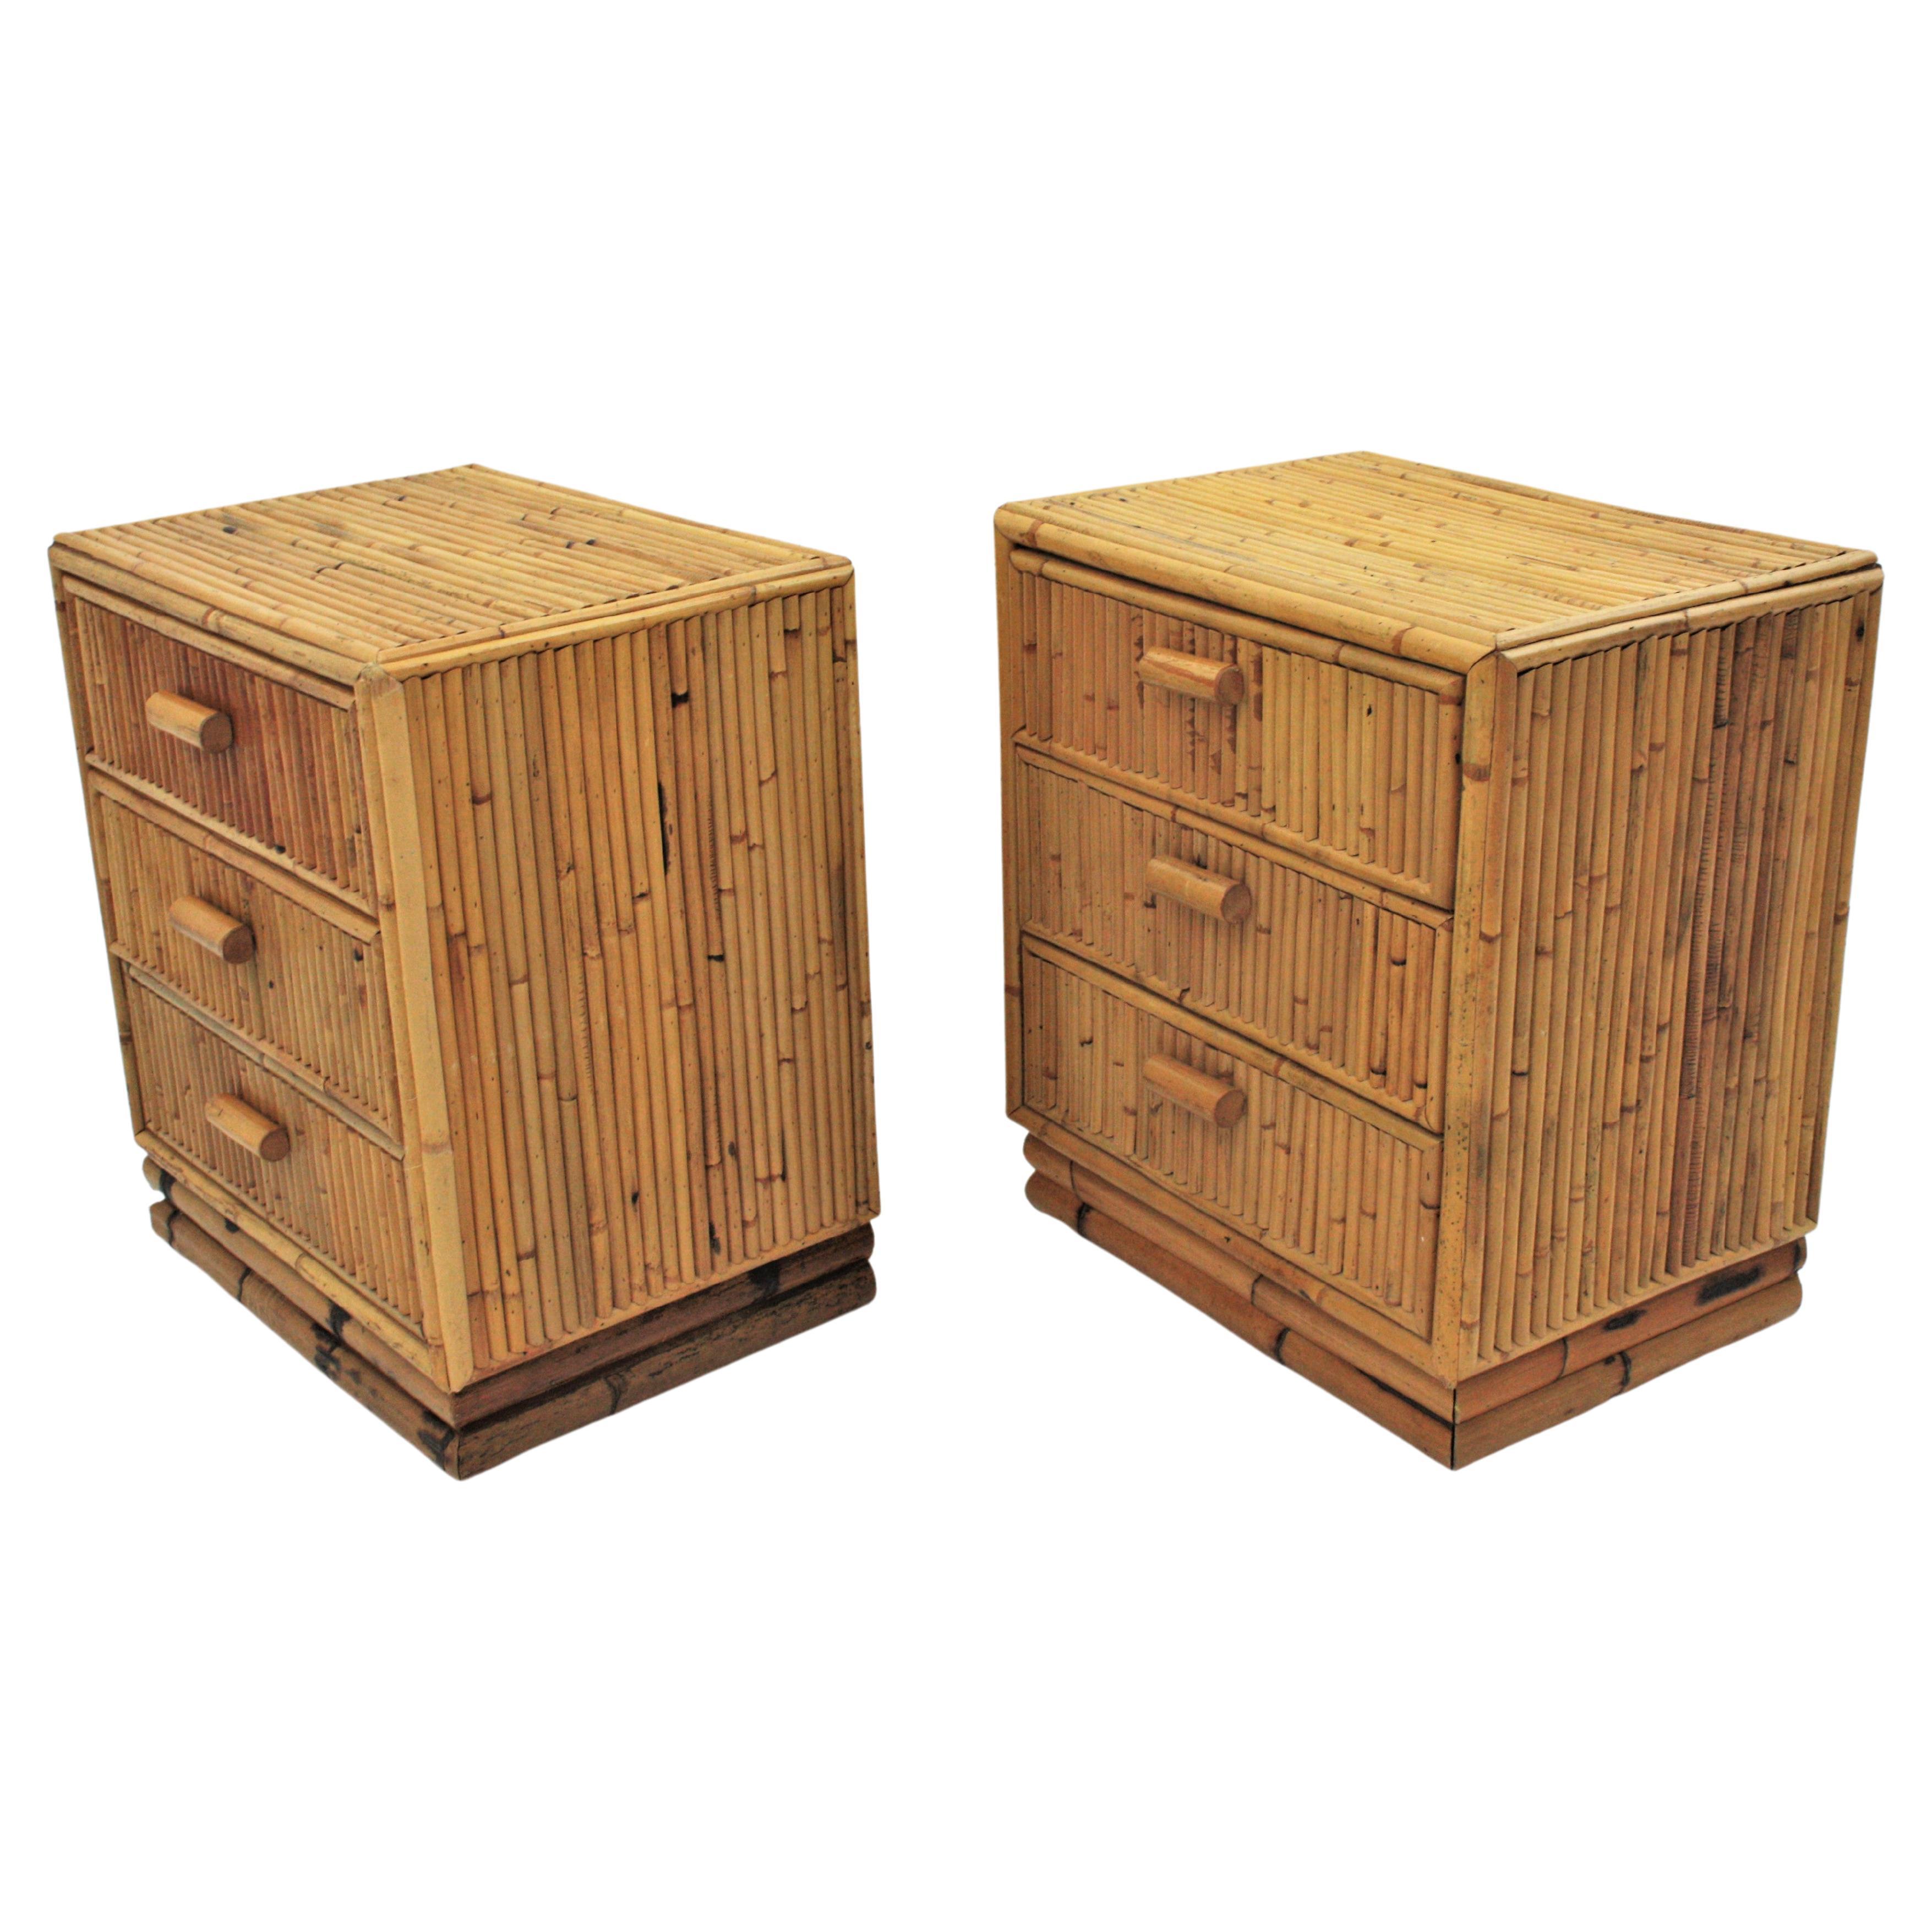 Pair of Spanish modern bamboo three-drawer end table stands or small chests, 1970s. 
Beautiful pair of bamboo small chests, end tables or nightstands.
These small chests of drawers have a wood and bamboo construction. The top, sides and the front